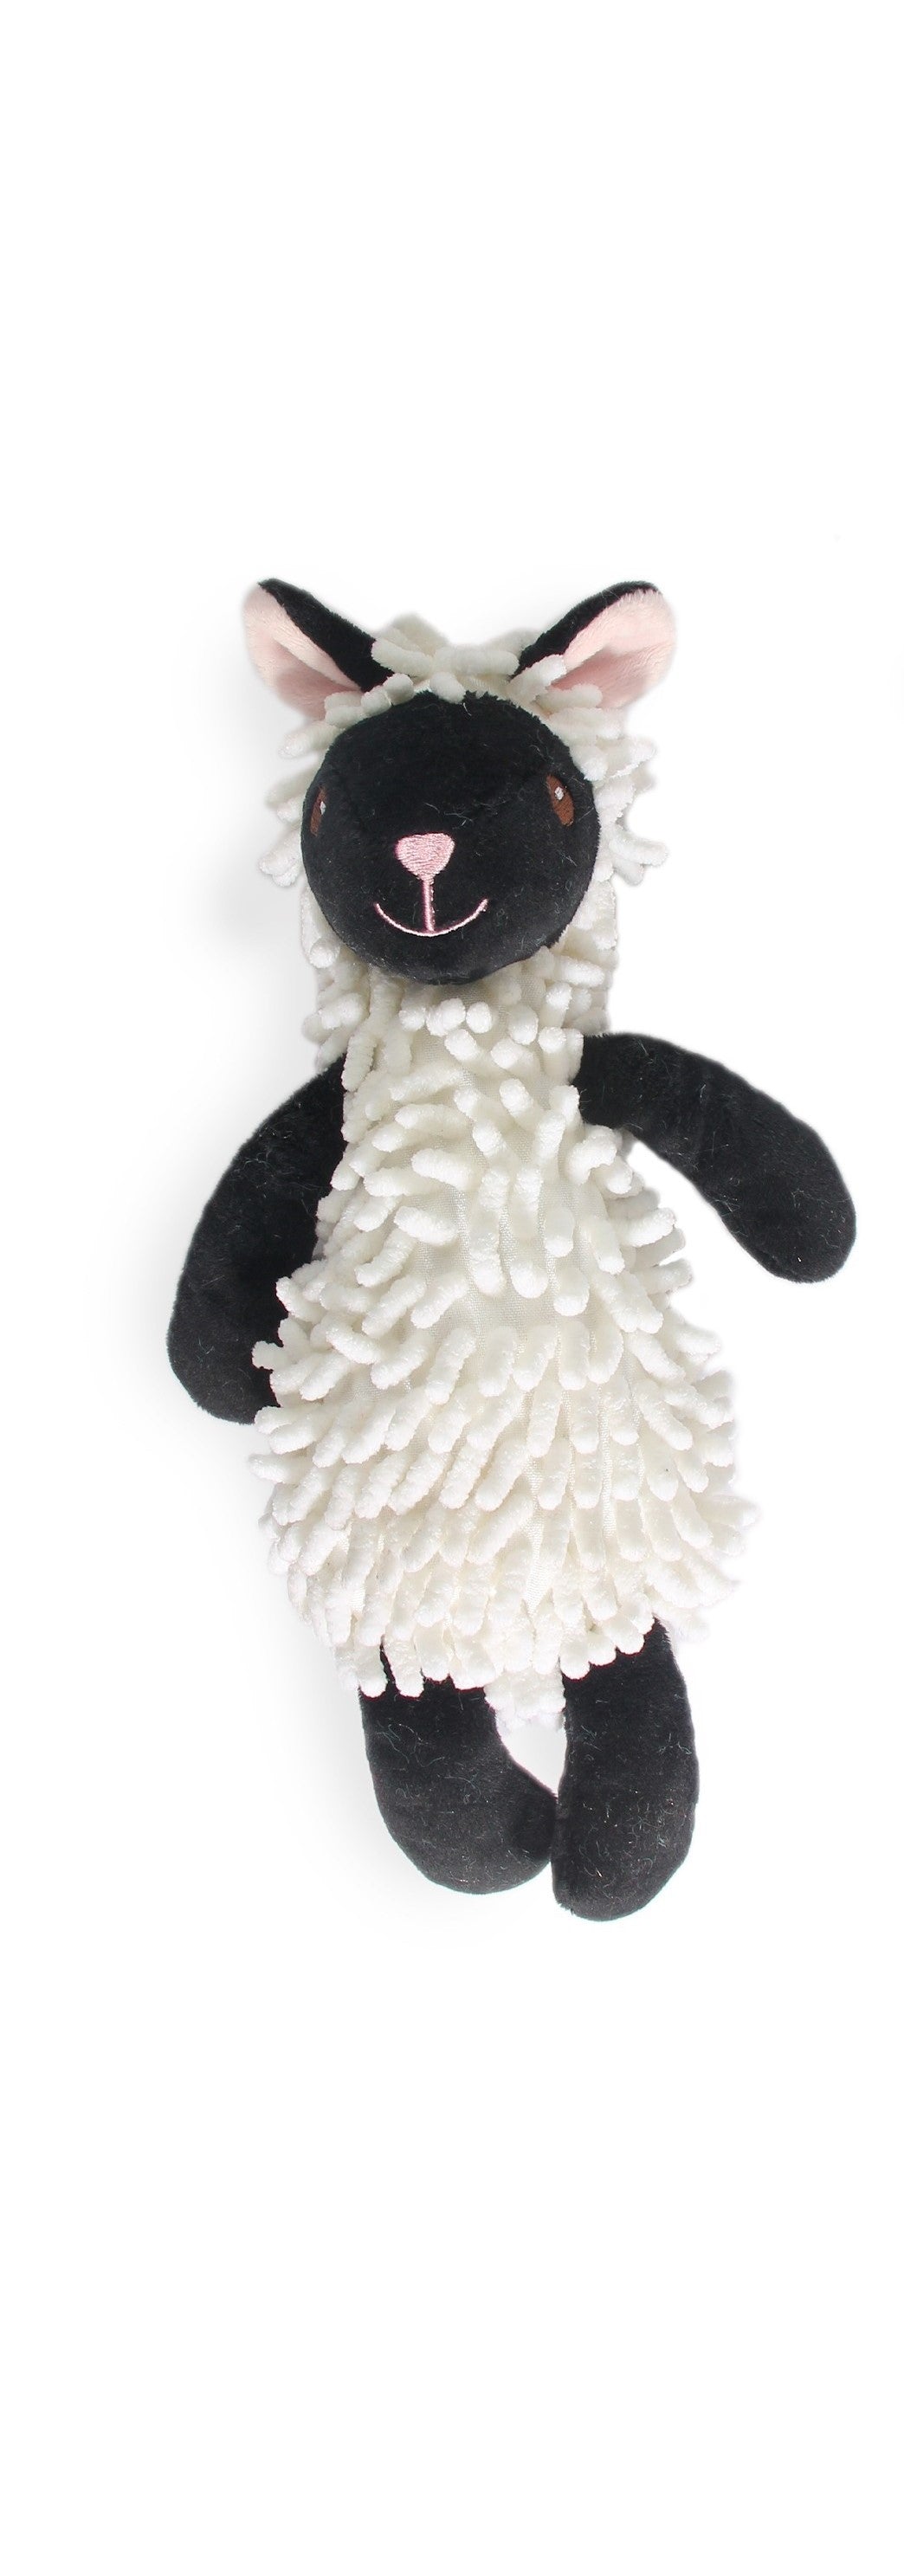 FLUFFY FRIENDS TOY - SHEEP